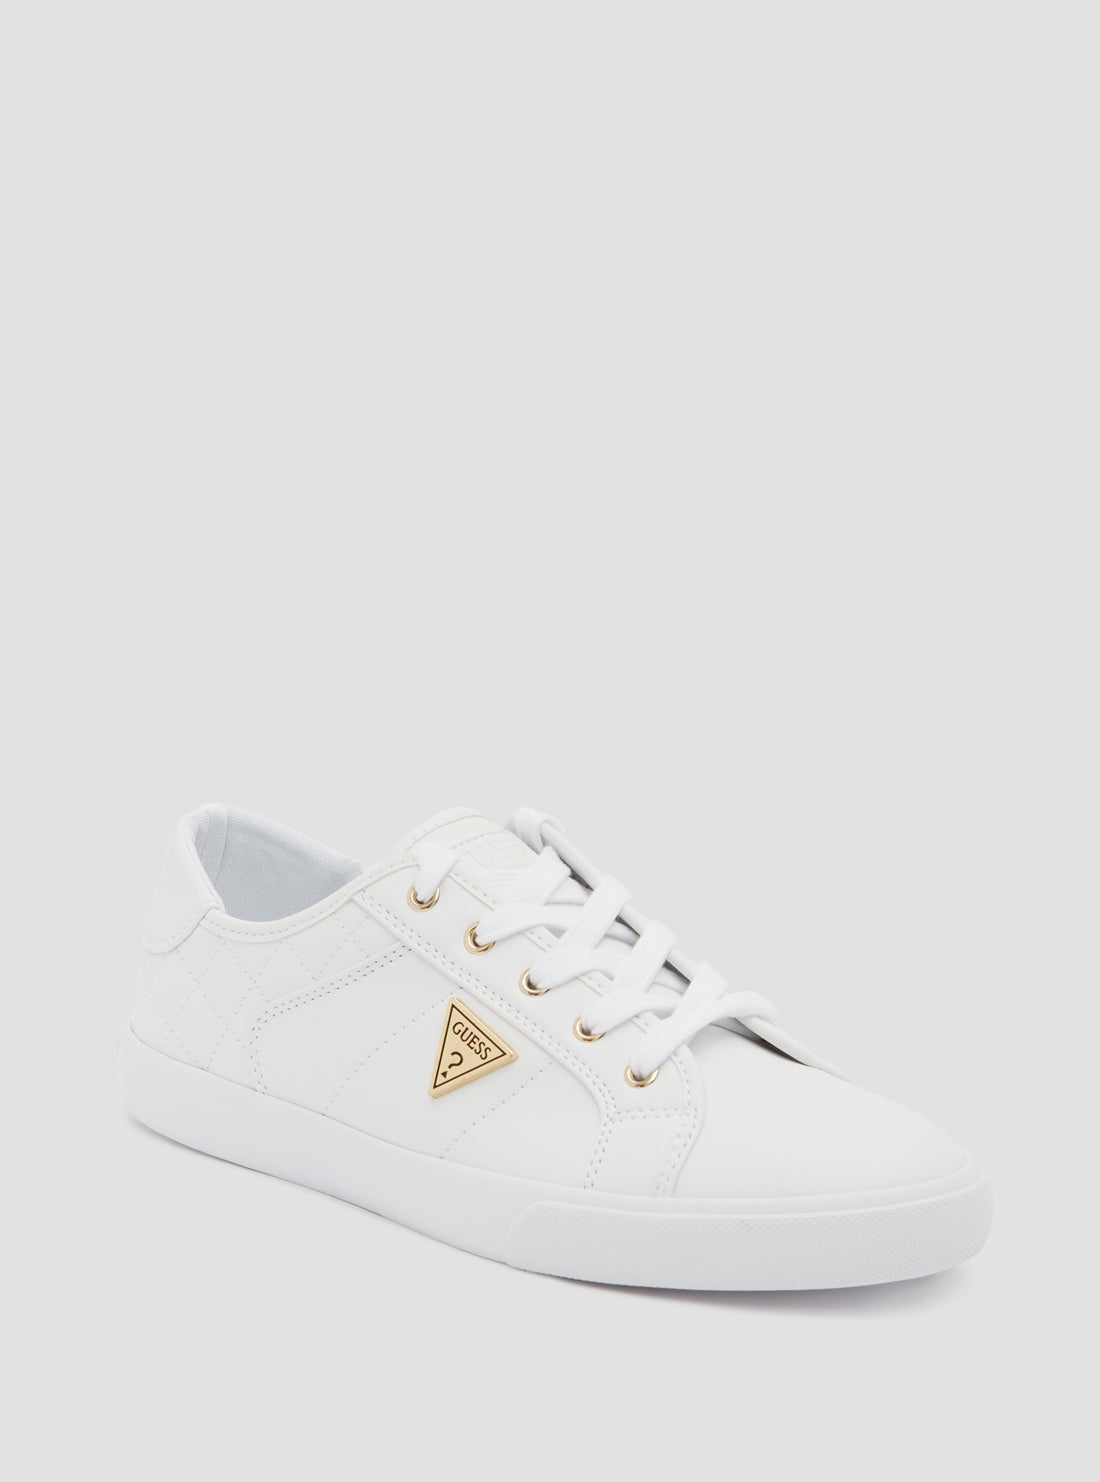 GUESS Women's White Comly Low Top Sneakers COMLY2-A Front View